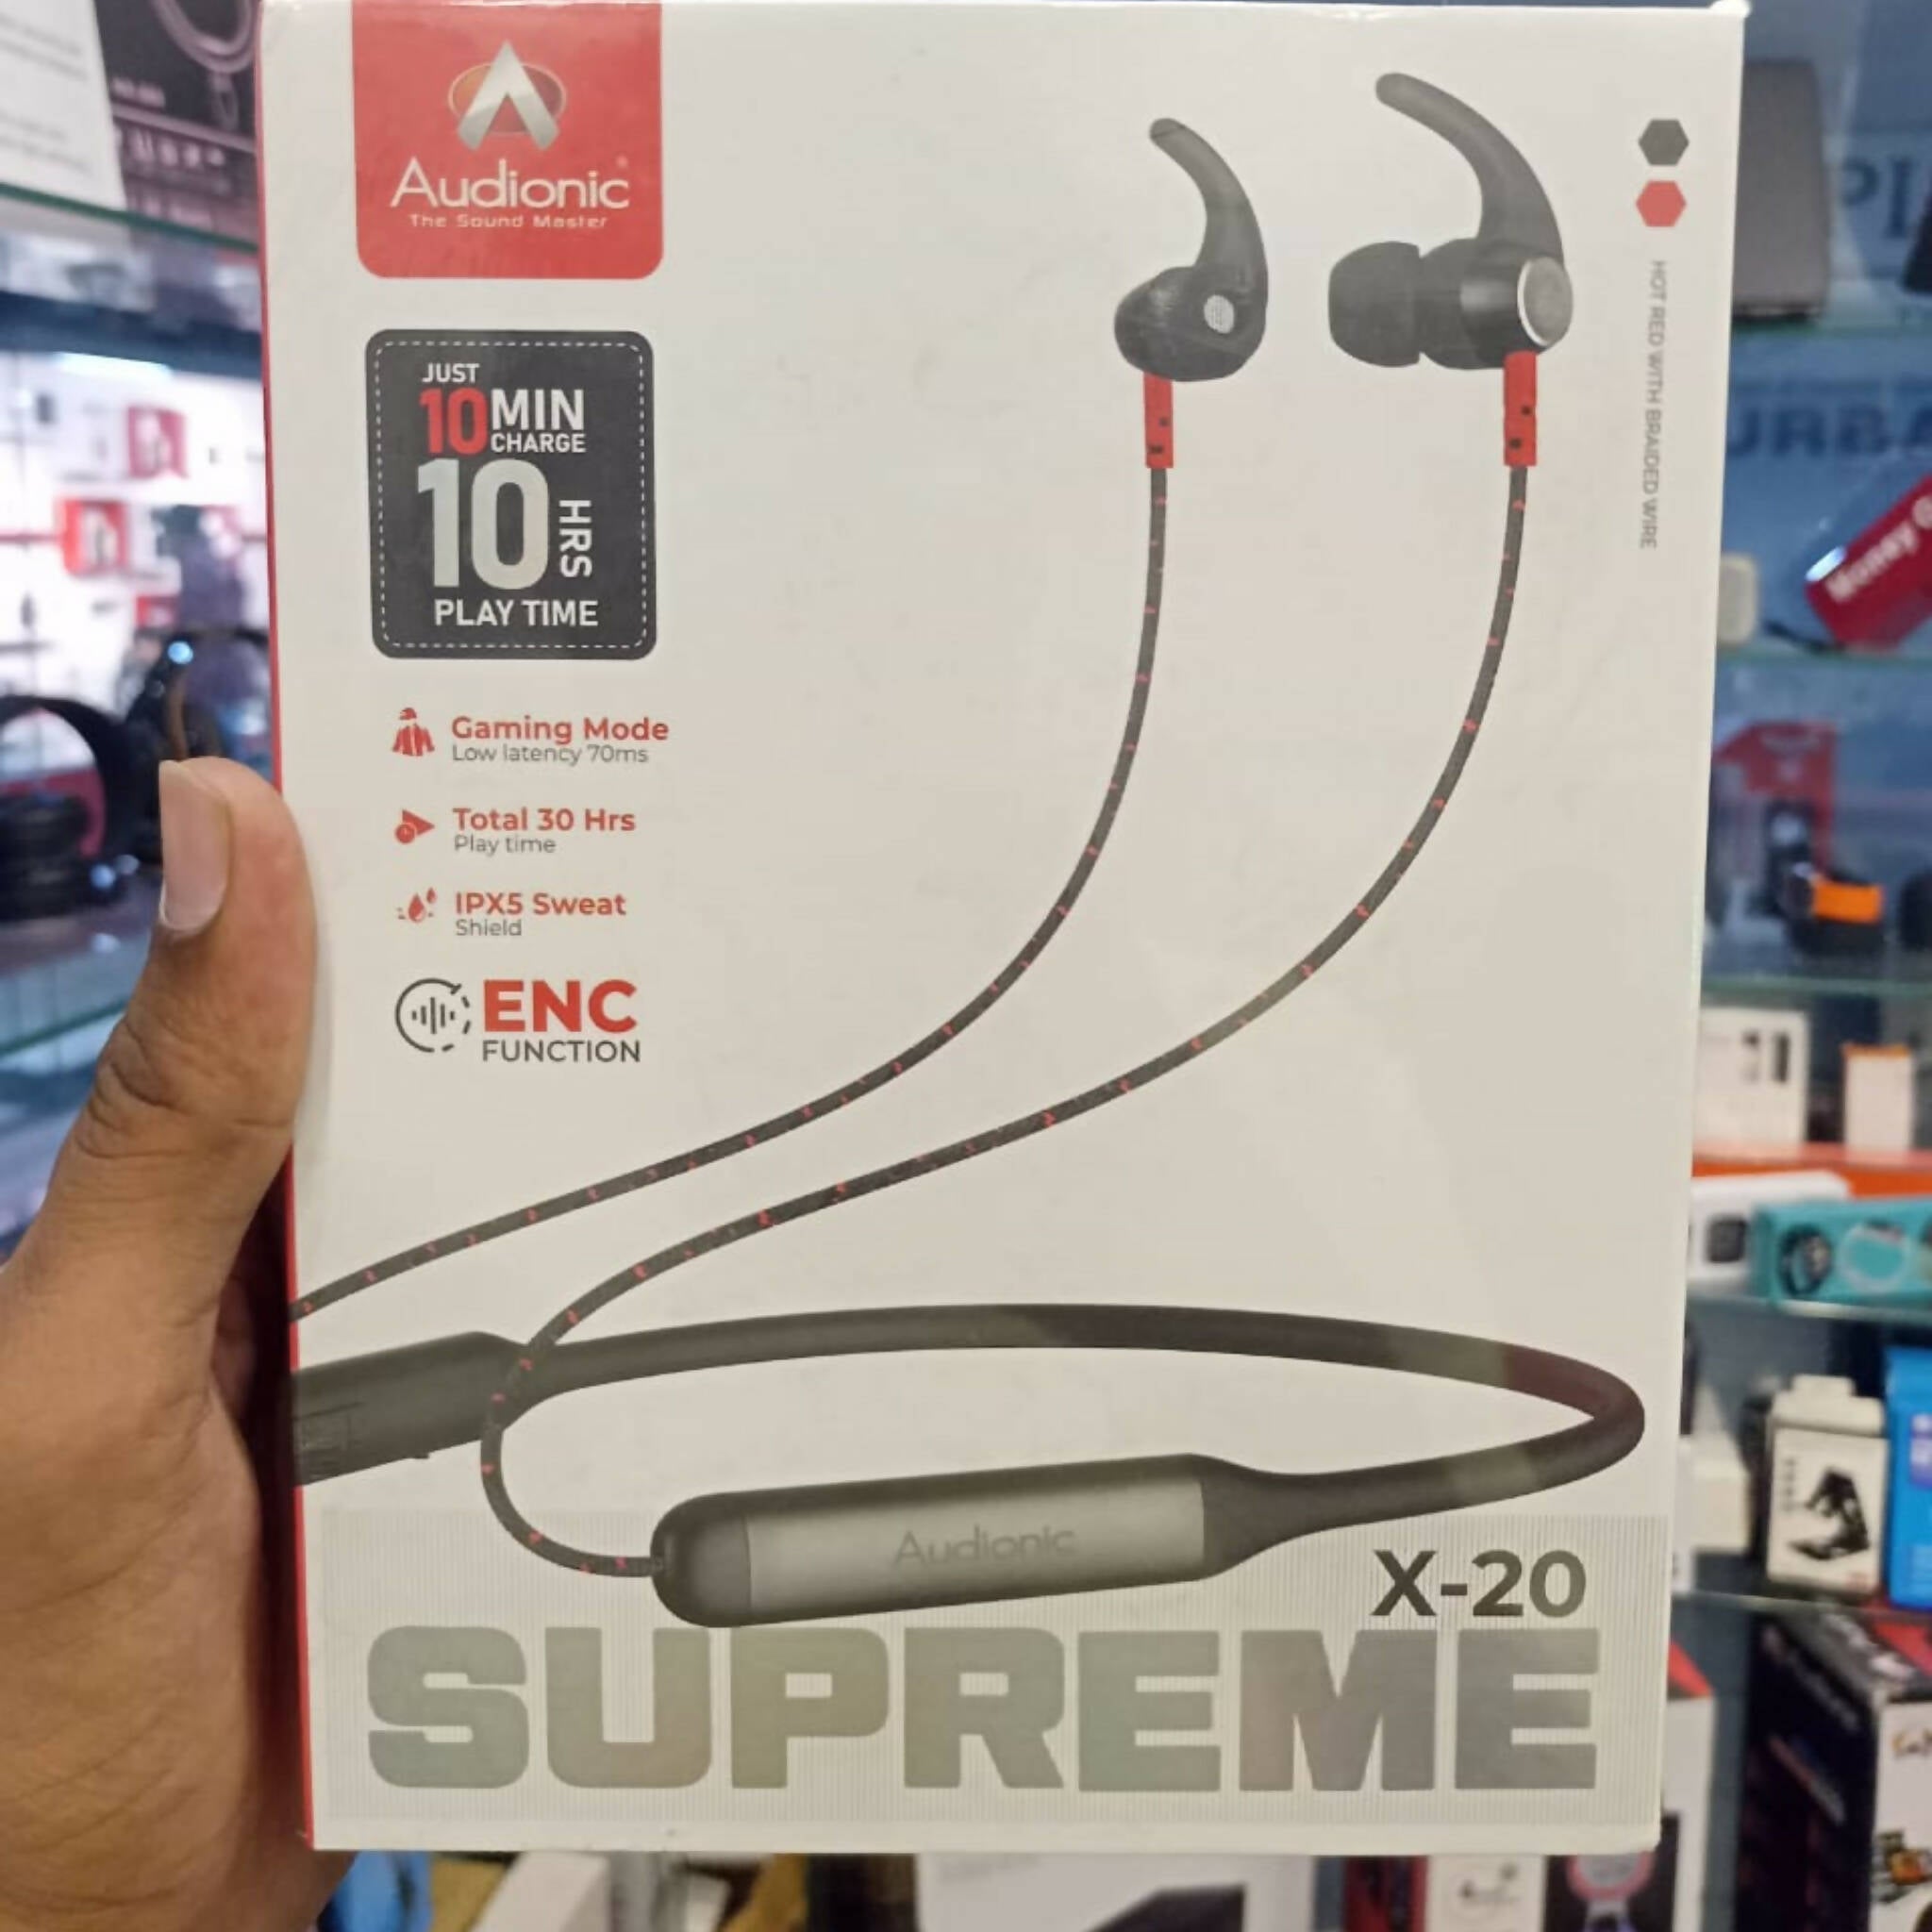 Neckband, Audionic Supreme X20, Dual Pairing Mode Connectivity